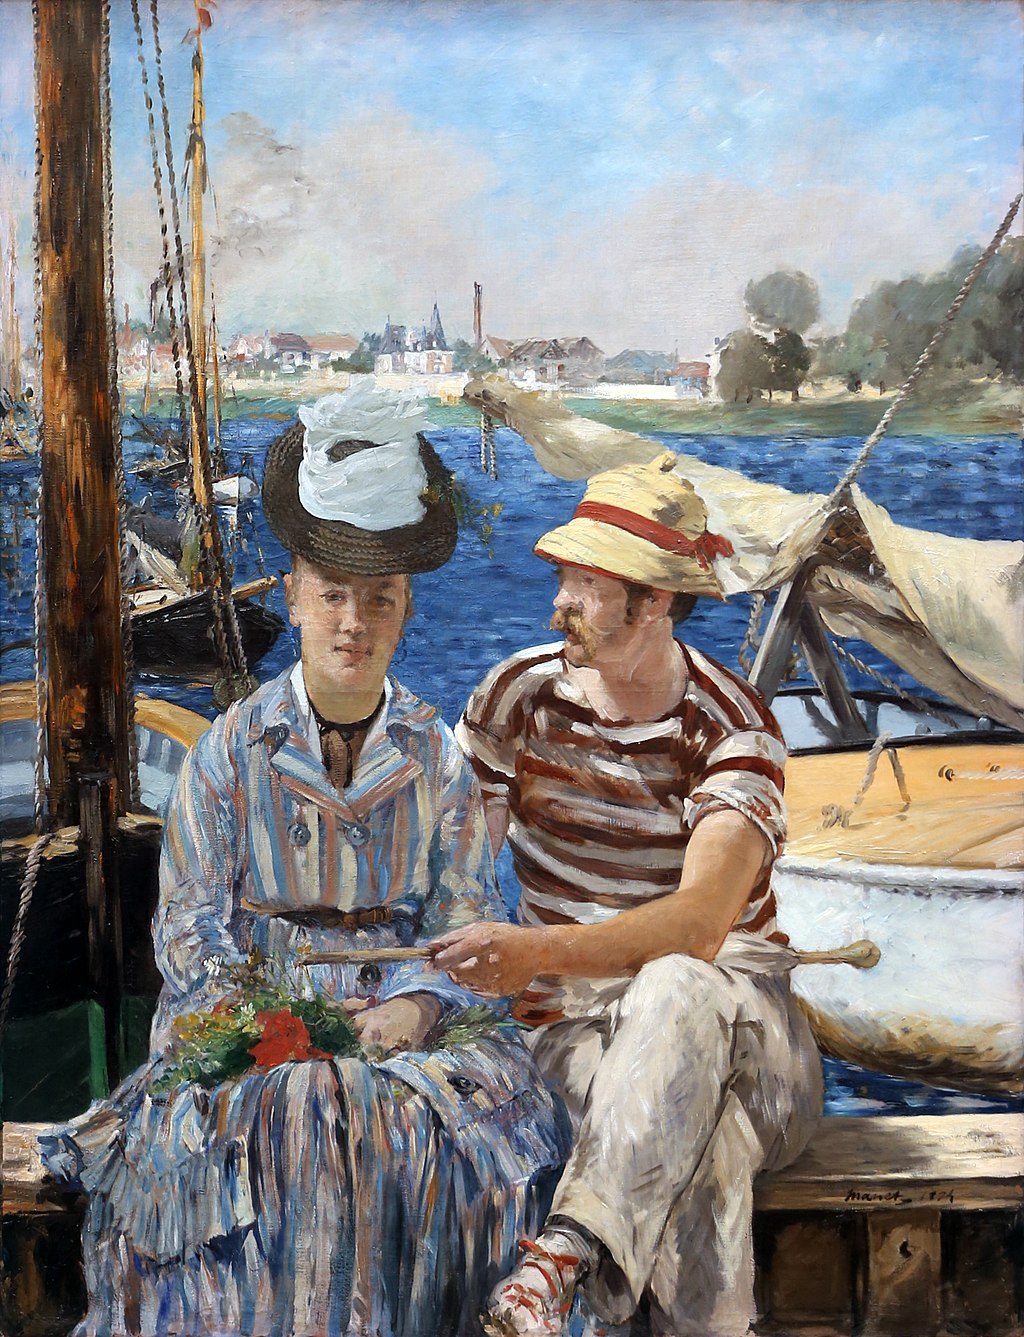 Argenteuil (Manet) by Edouard Manet, Reproduction Oil on Canvas. Edouard Manet, Reproduction Oil on Canvas. Manet artworks, Manet reproduction, Manet famous work, manet painting, manet print, manet poster, manet fans art, manet gift art, Edouard Manet masterpiece